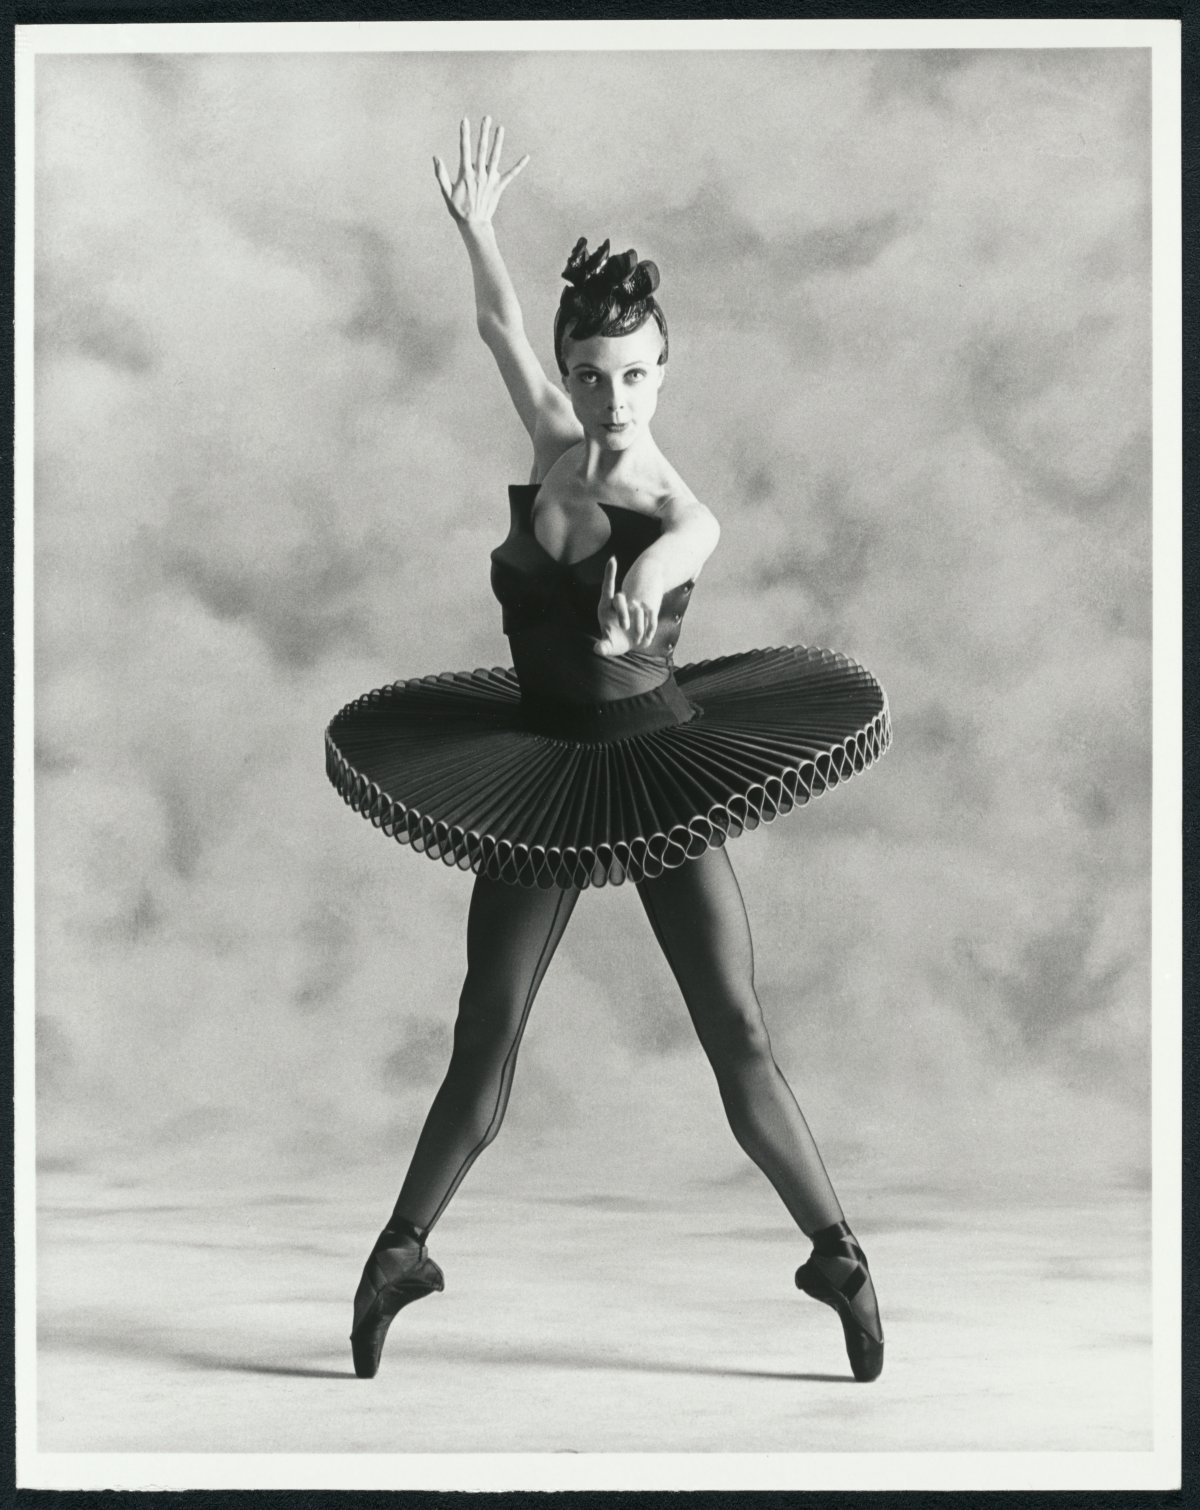 Ballerina Justine Summers strikes a pose for the camera. She is standing en point wearing a black tutu. She is standing infront of a textured curtain. She is staring directly at the camera.